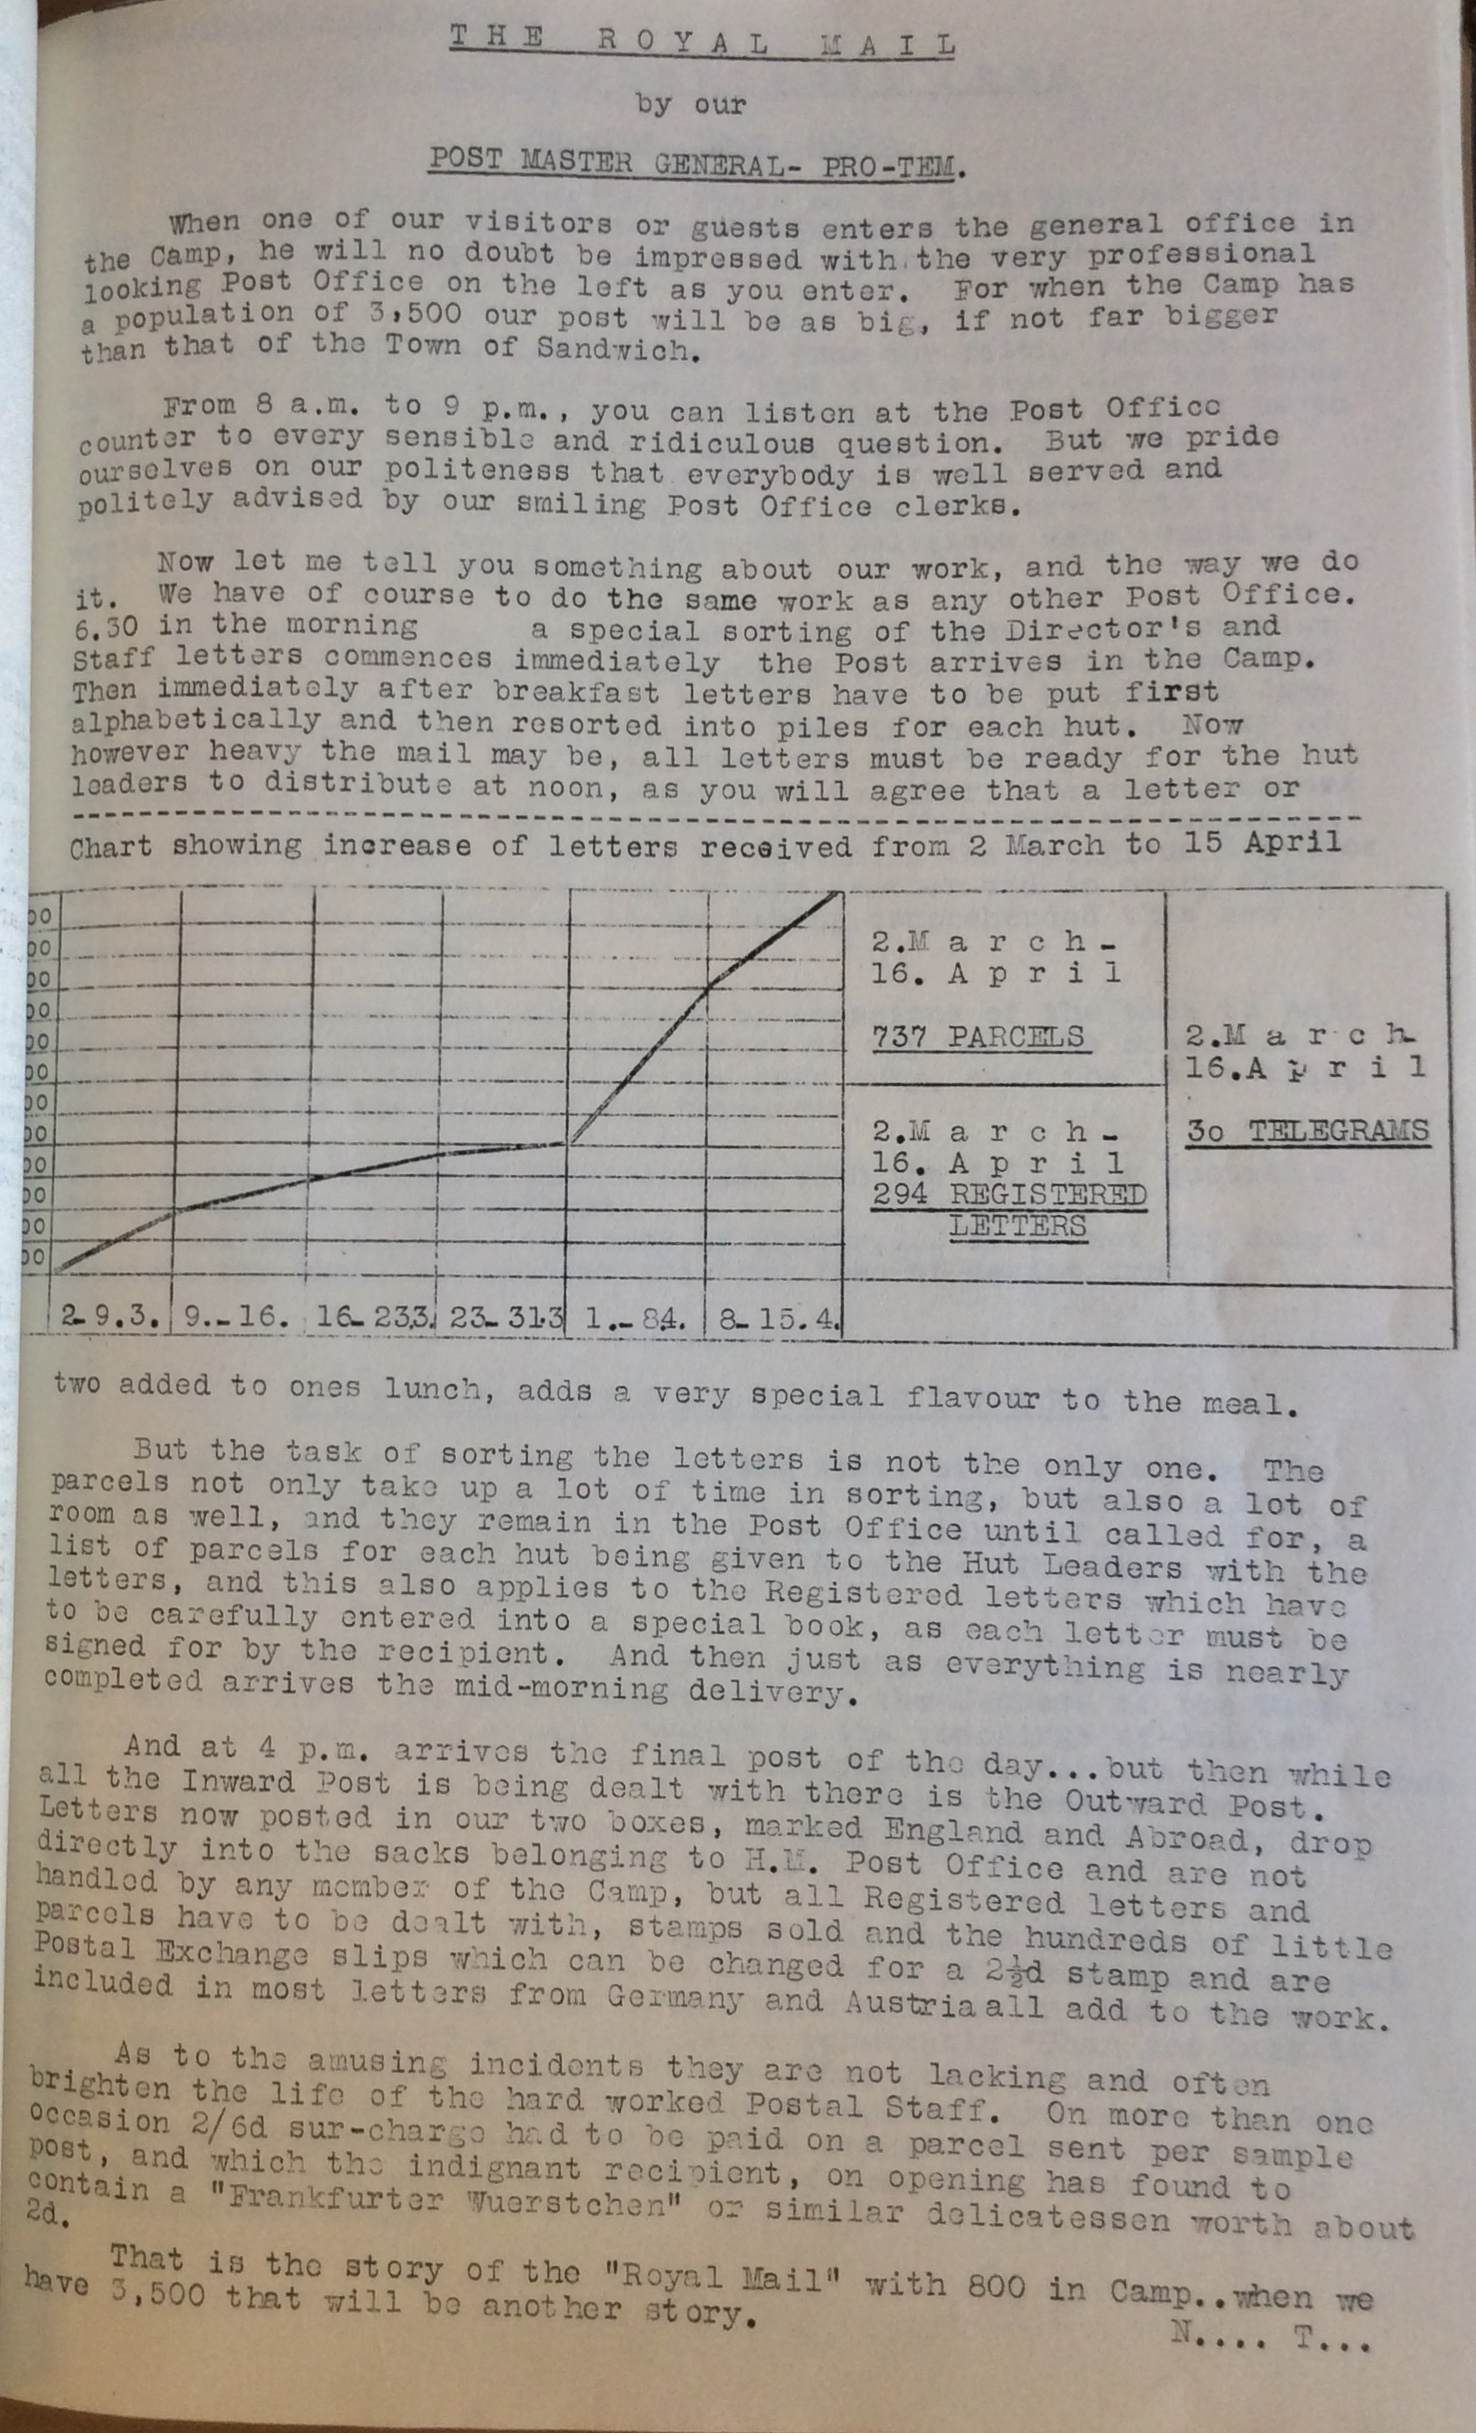 Kitchener Camp Review, May 1939, page 8